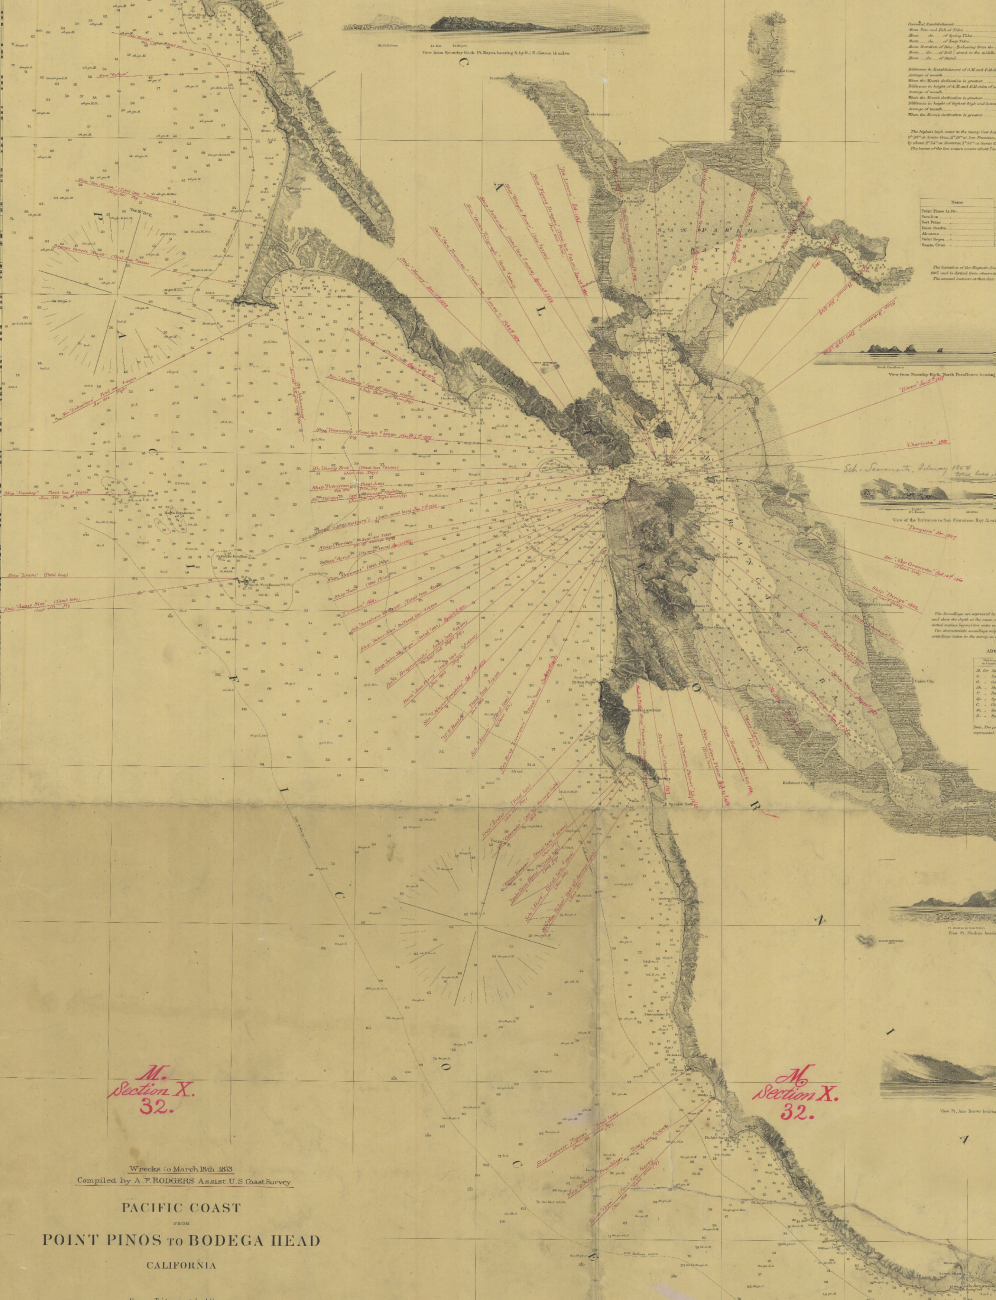 Blowup of map of Wrecks to March 18th, 1873